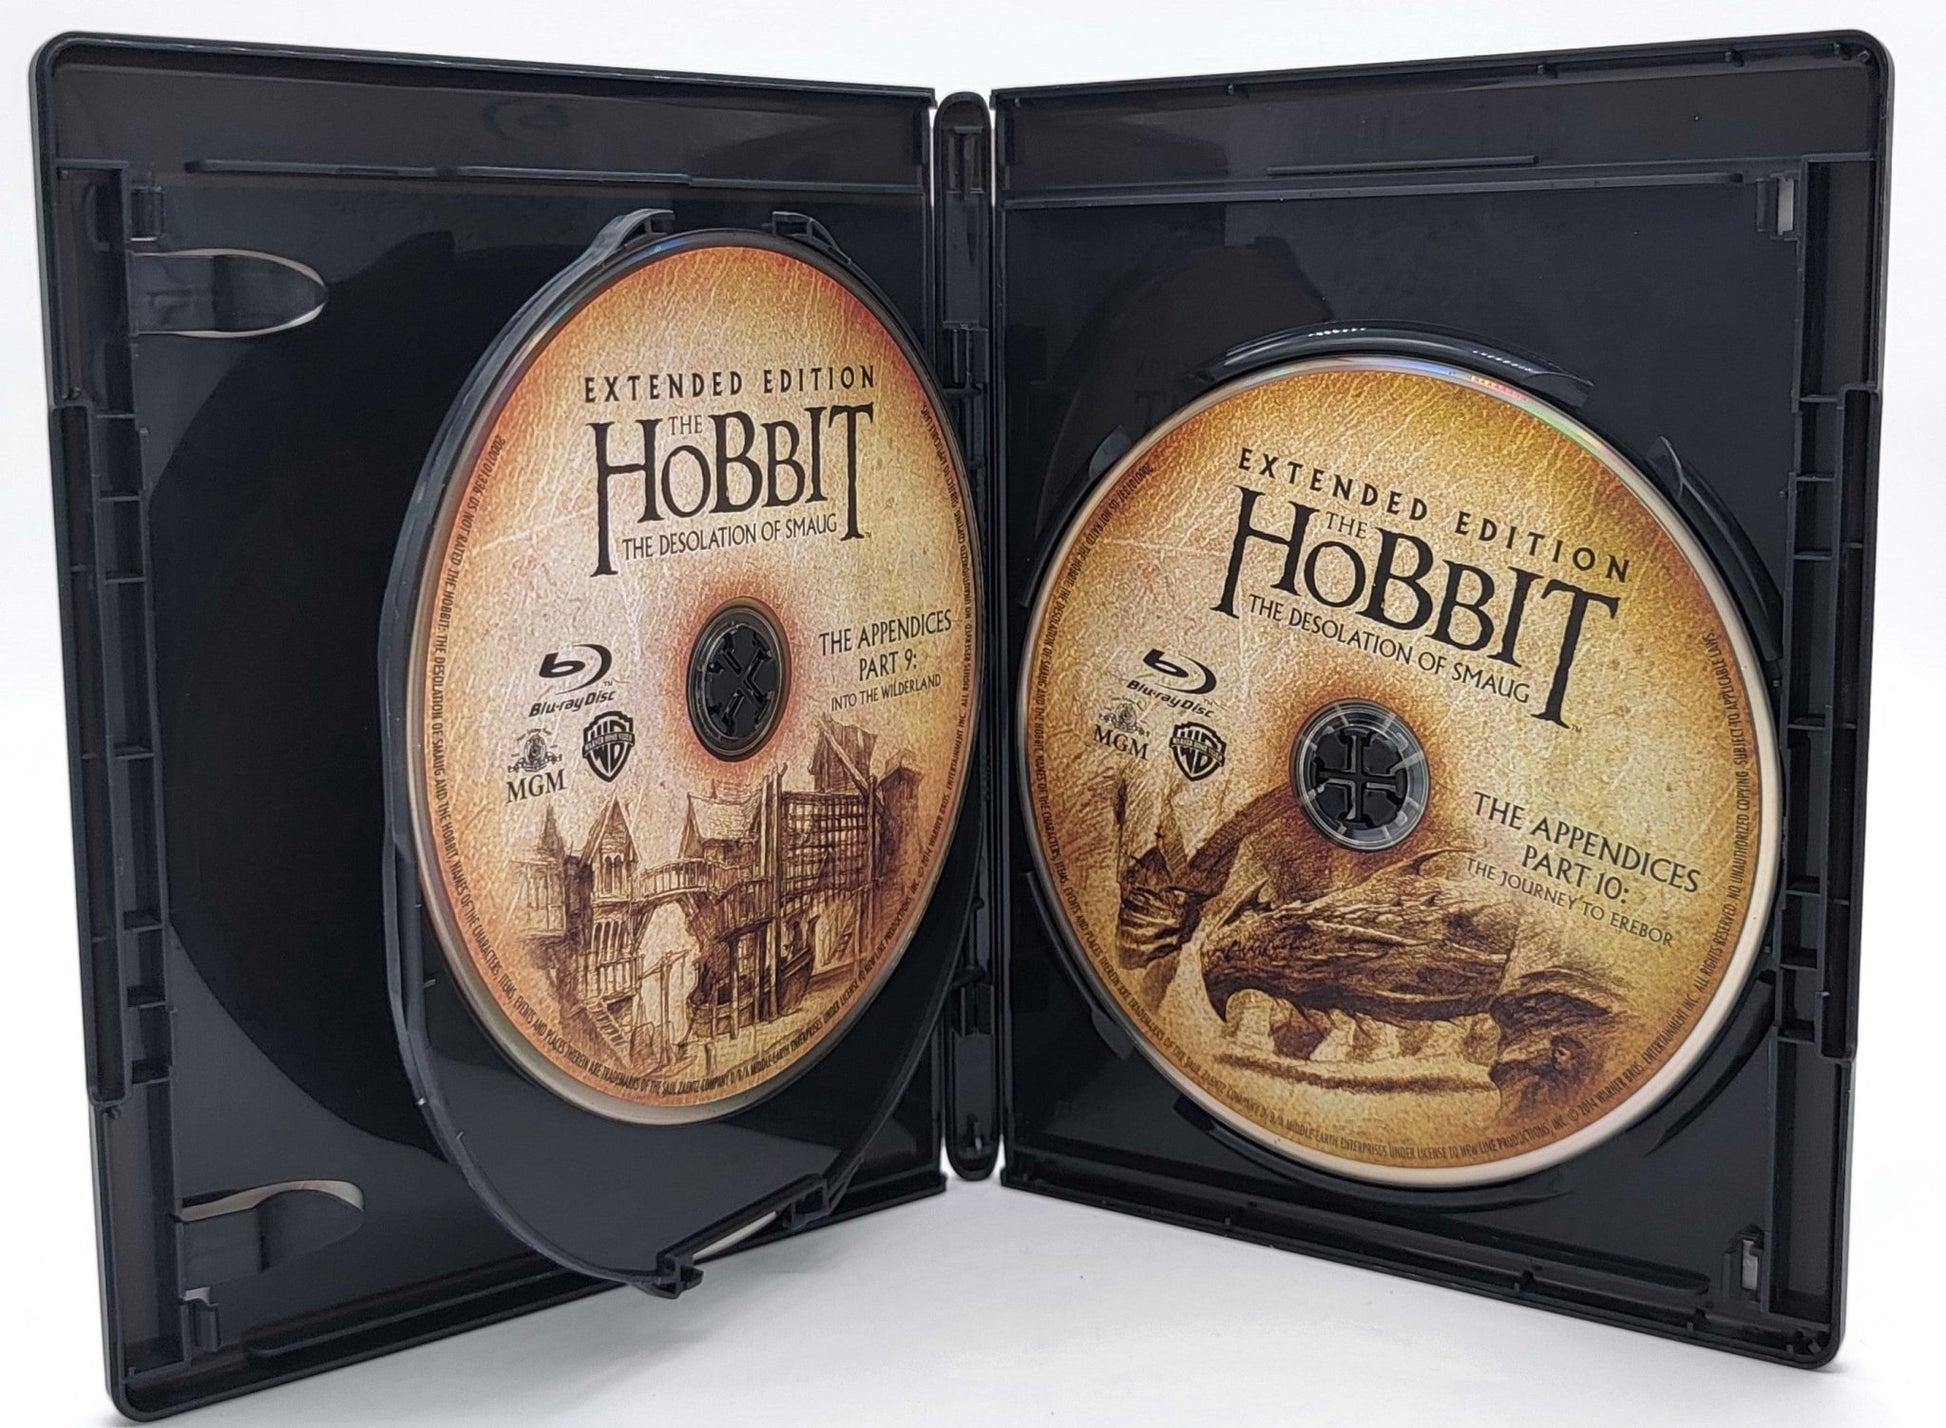 Warner Brother - The Hobbit - The Desolation of Smaug | Blu Ray | 3 Disc Set - Extended Edition - DVD - Steady Bunny Shop